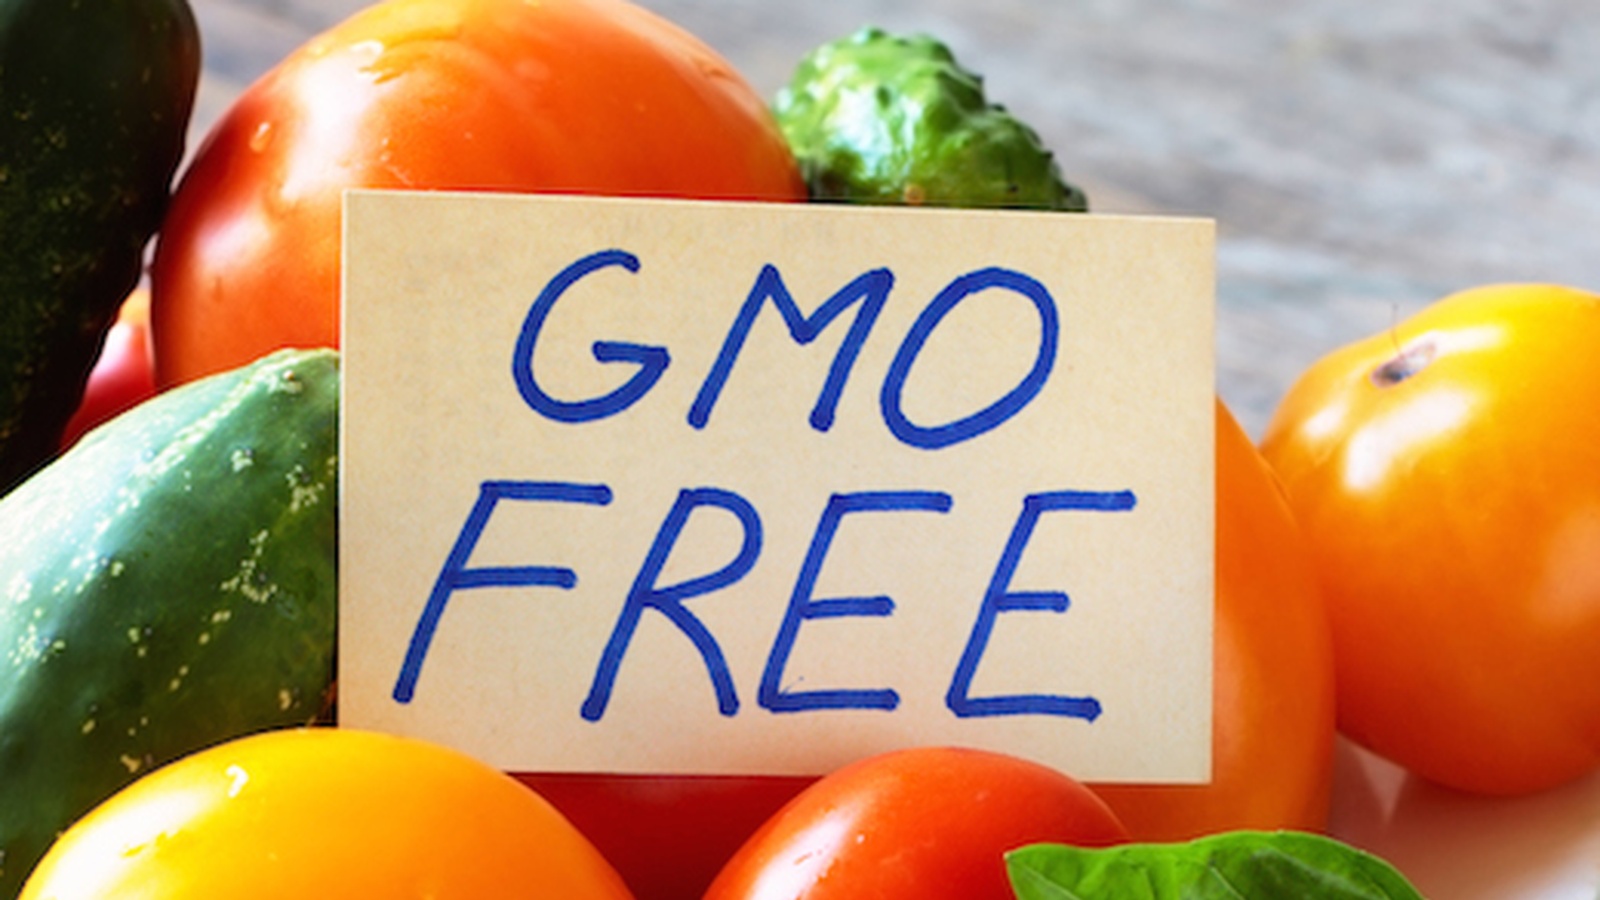 5 Tips On How To Dine Out GMO Free